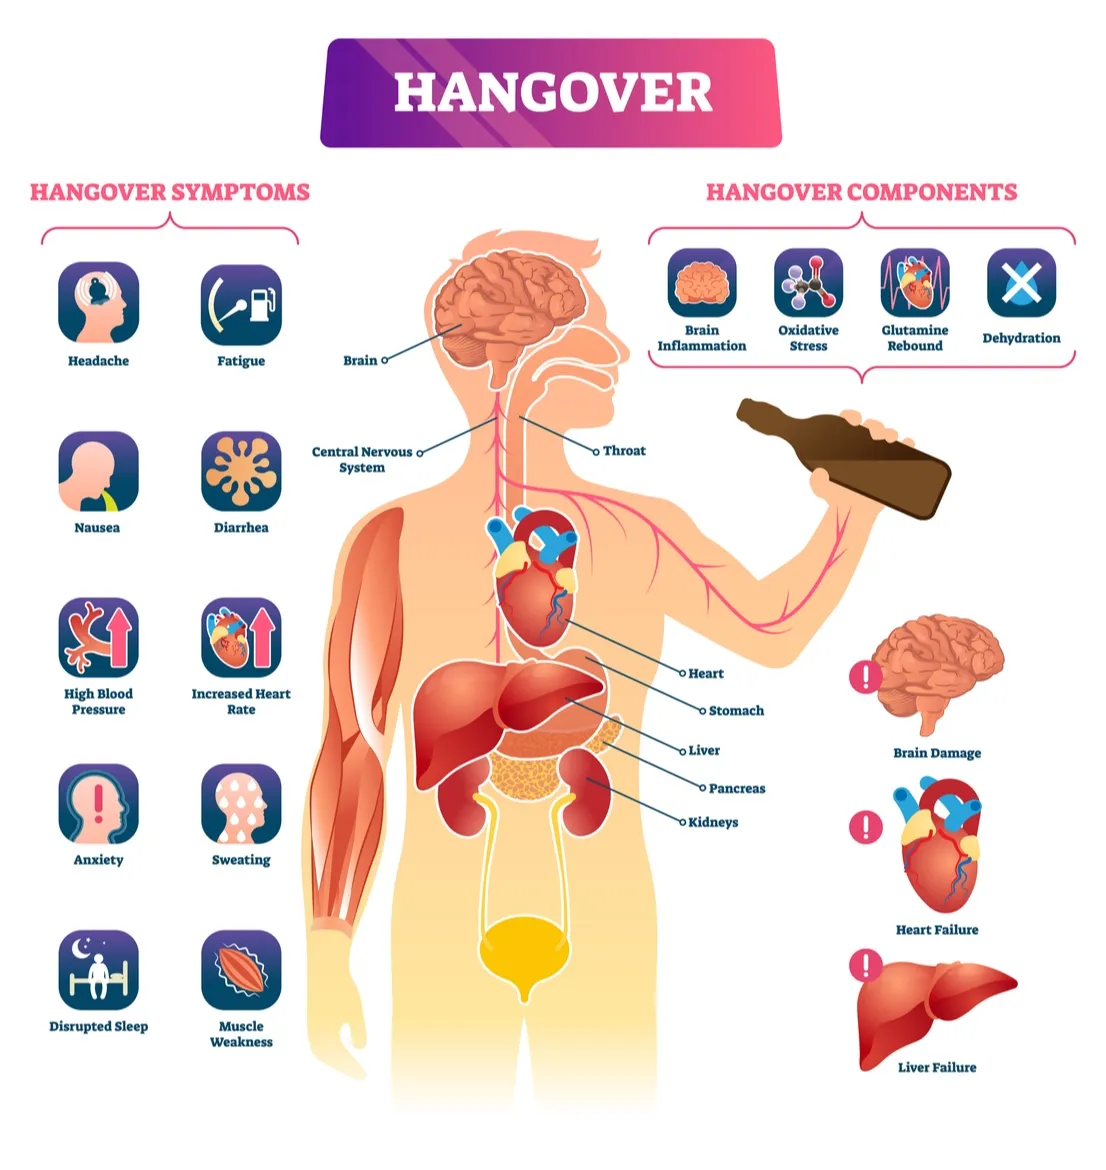 Alcohol Use Disorder. (AUD)